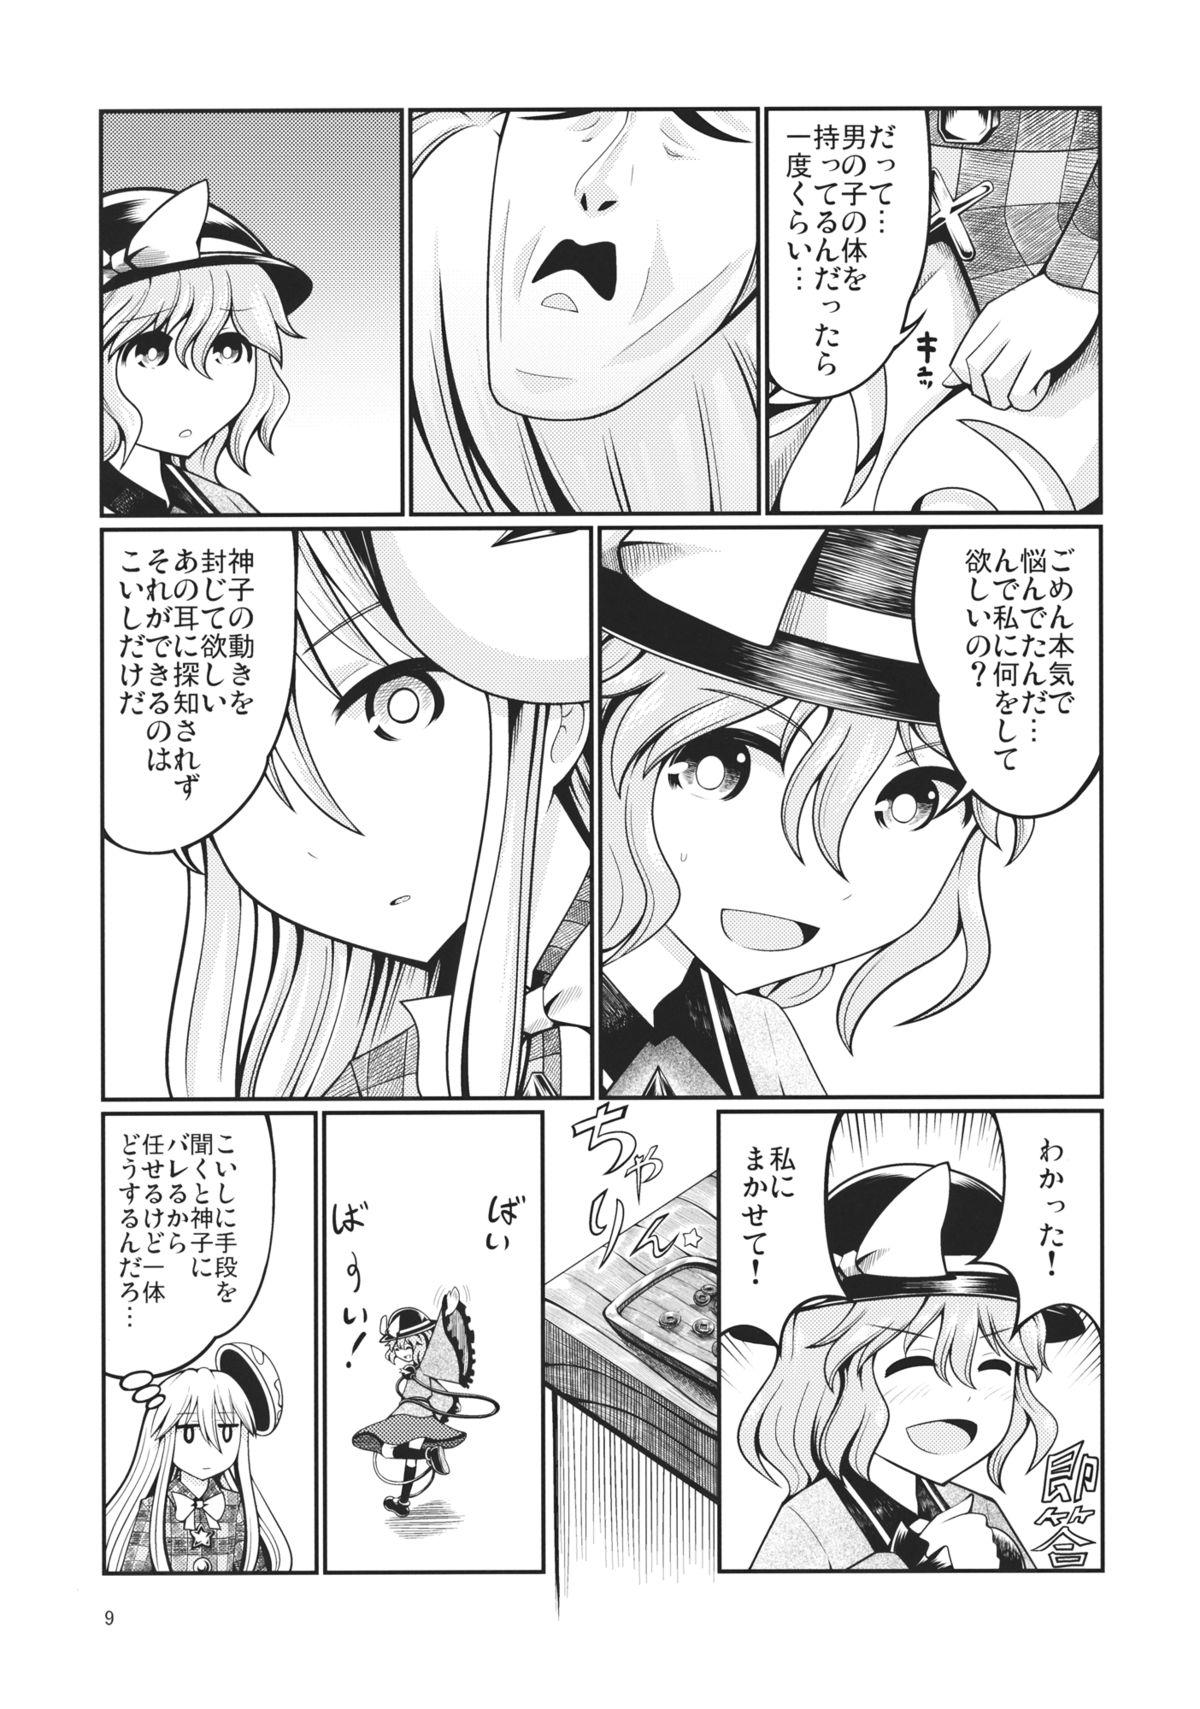 Vaginal Reverse Sexuality 3 - Touhou project Big Dicks - Page 8